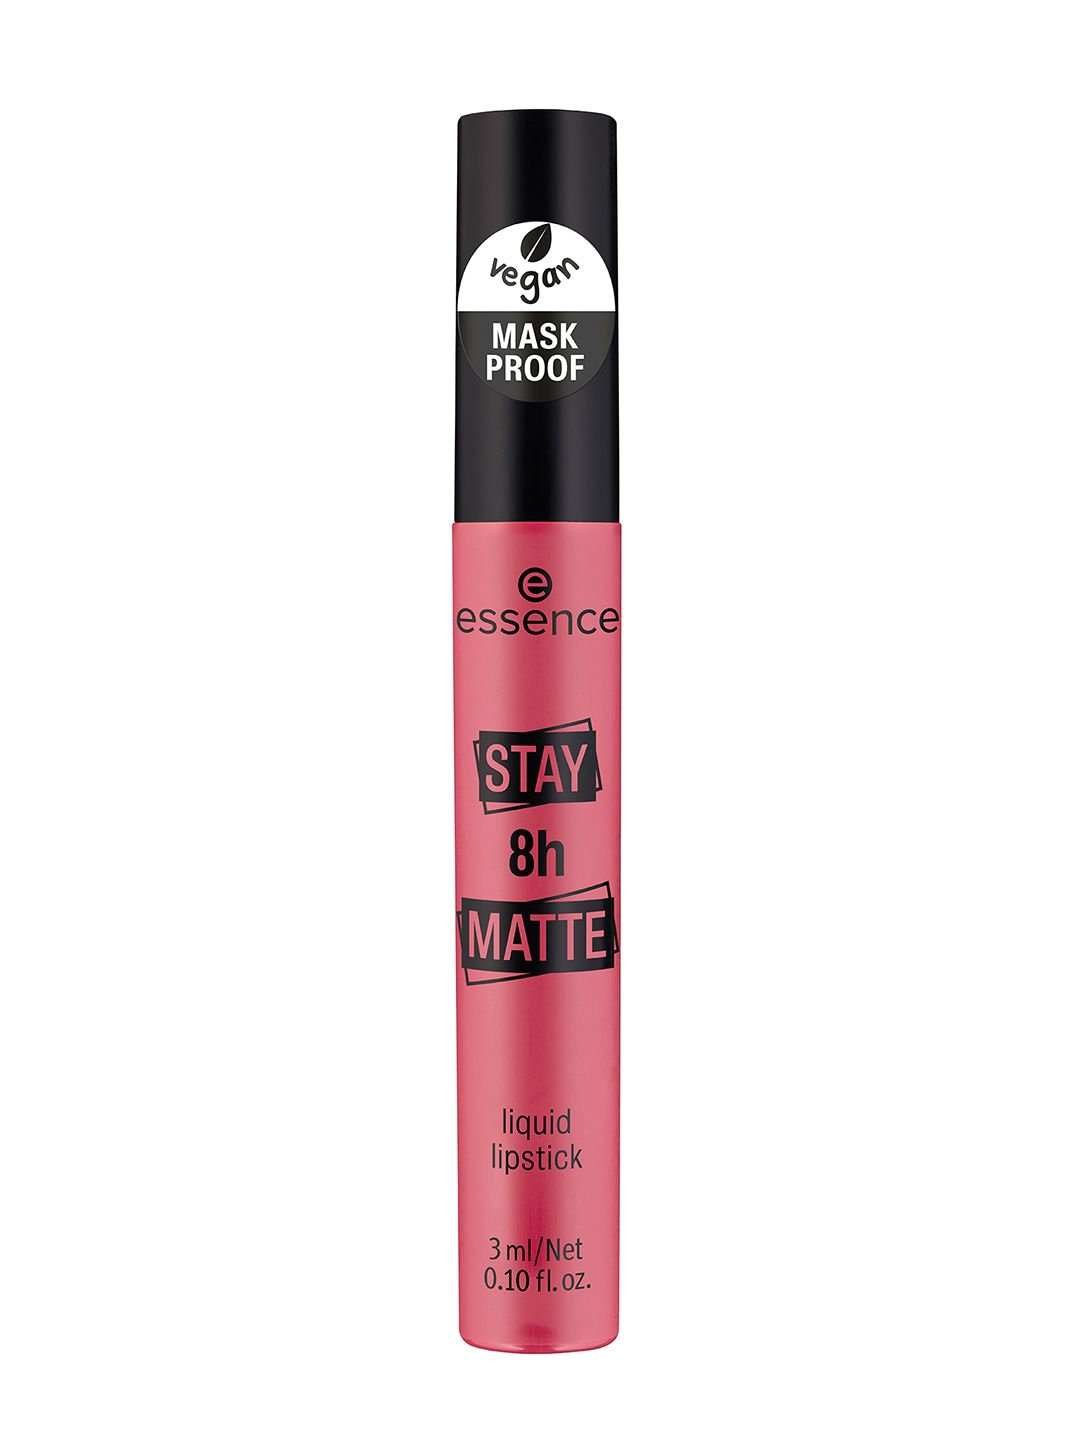 essence Stay 8H Matte Vegan Mask Proof Liquid Lipstick 3 ml - Mad About You 04 Price in India